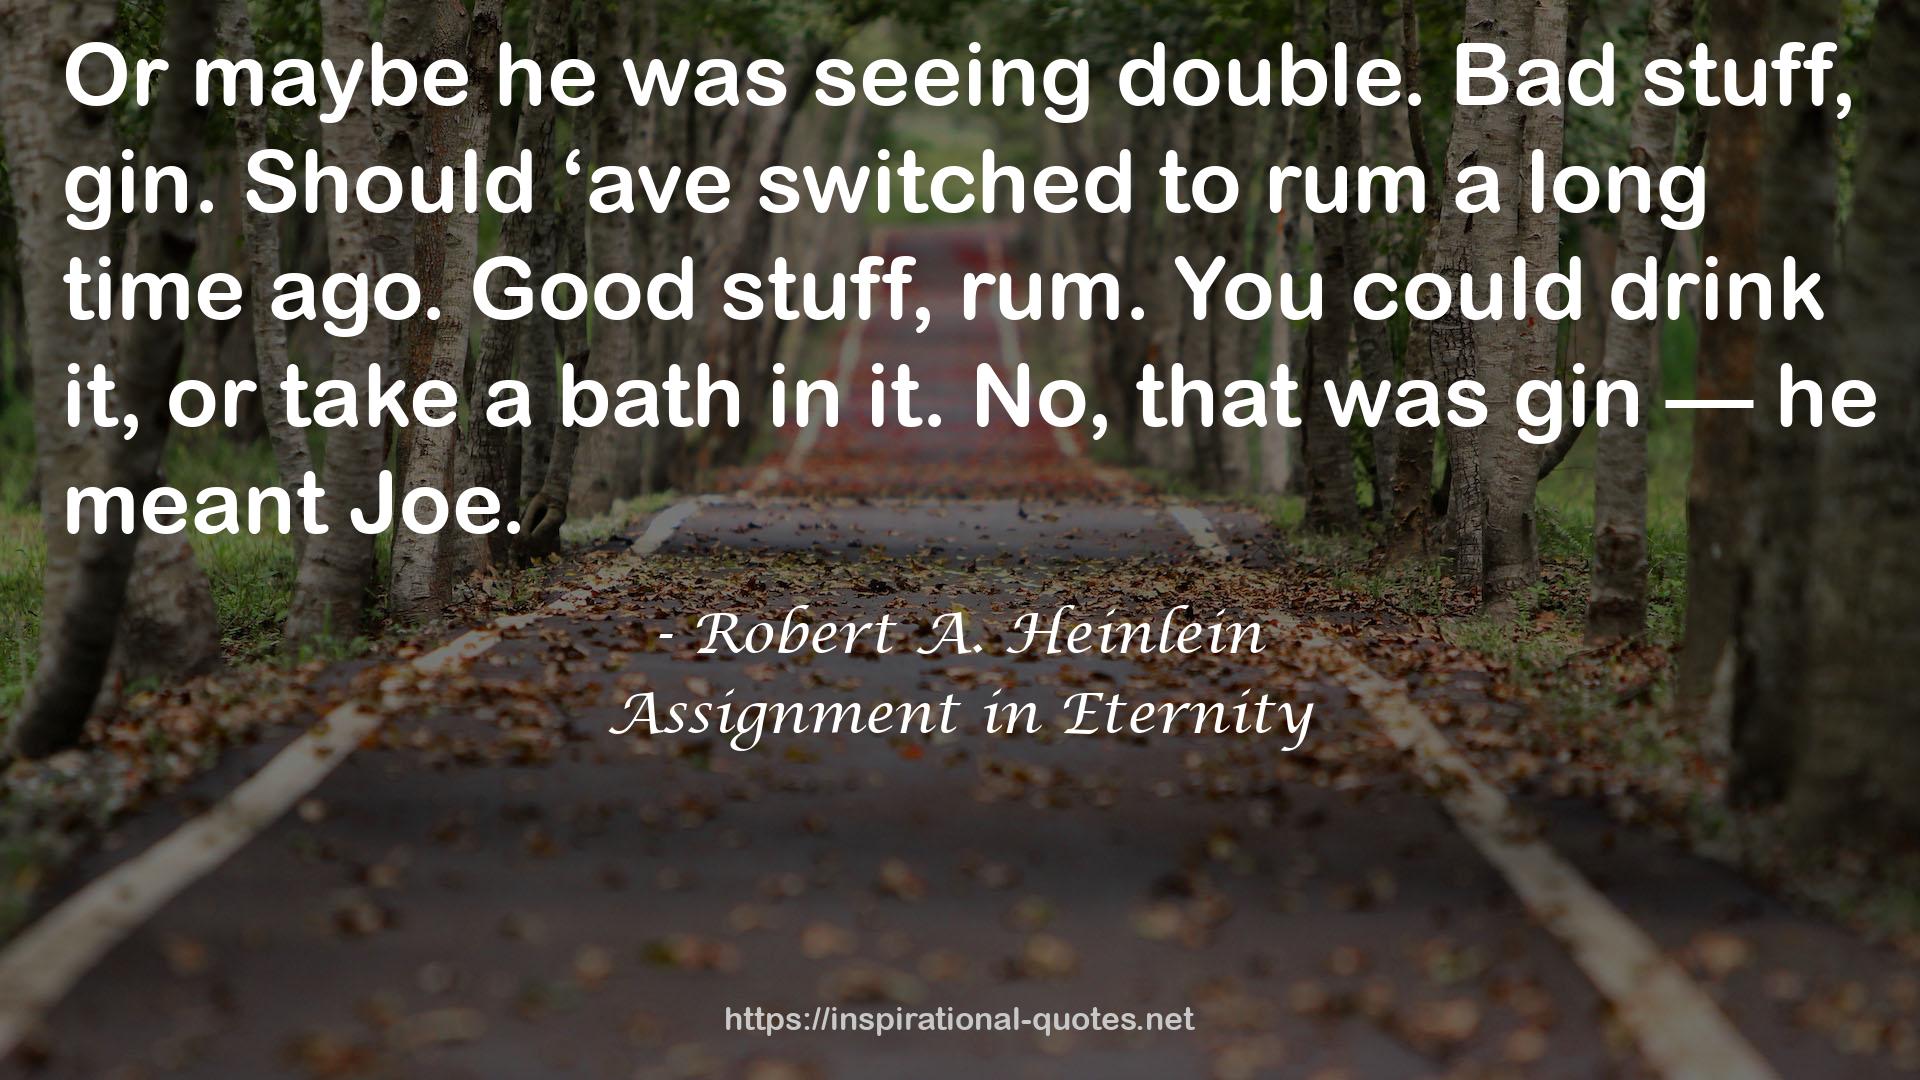 Assignment in Eternity QUOTES